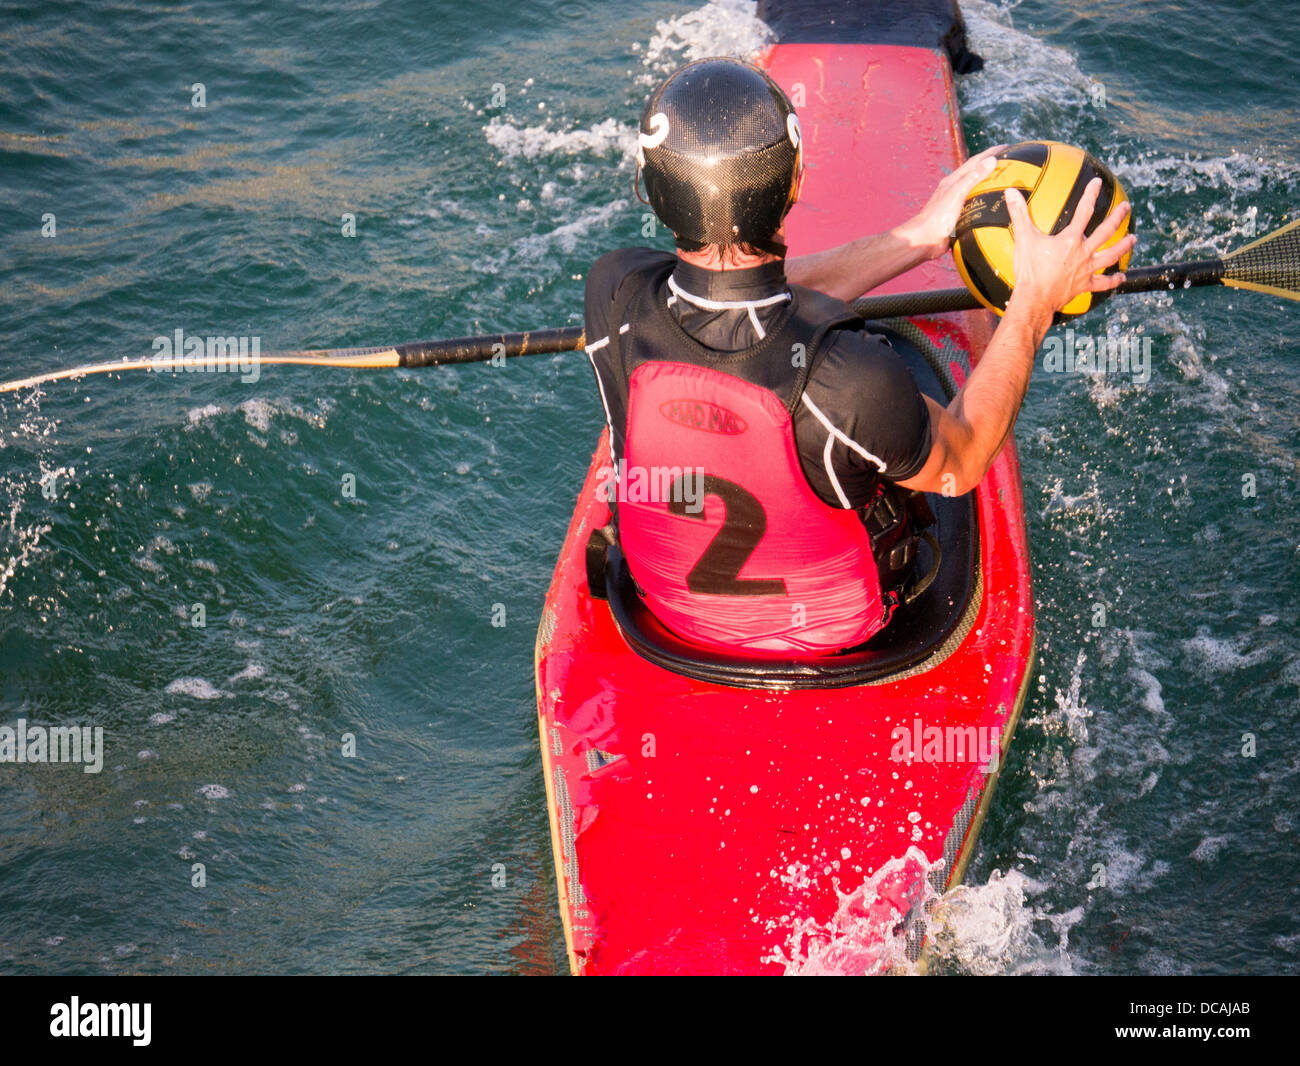 Man in red and black plays canoe polo / kayak polo Stock Photo